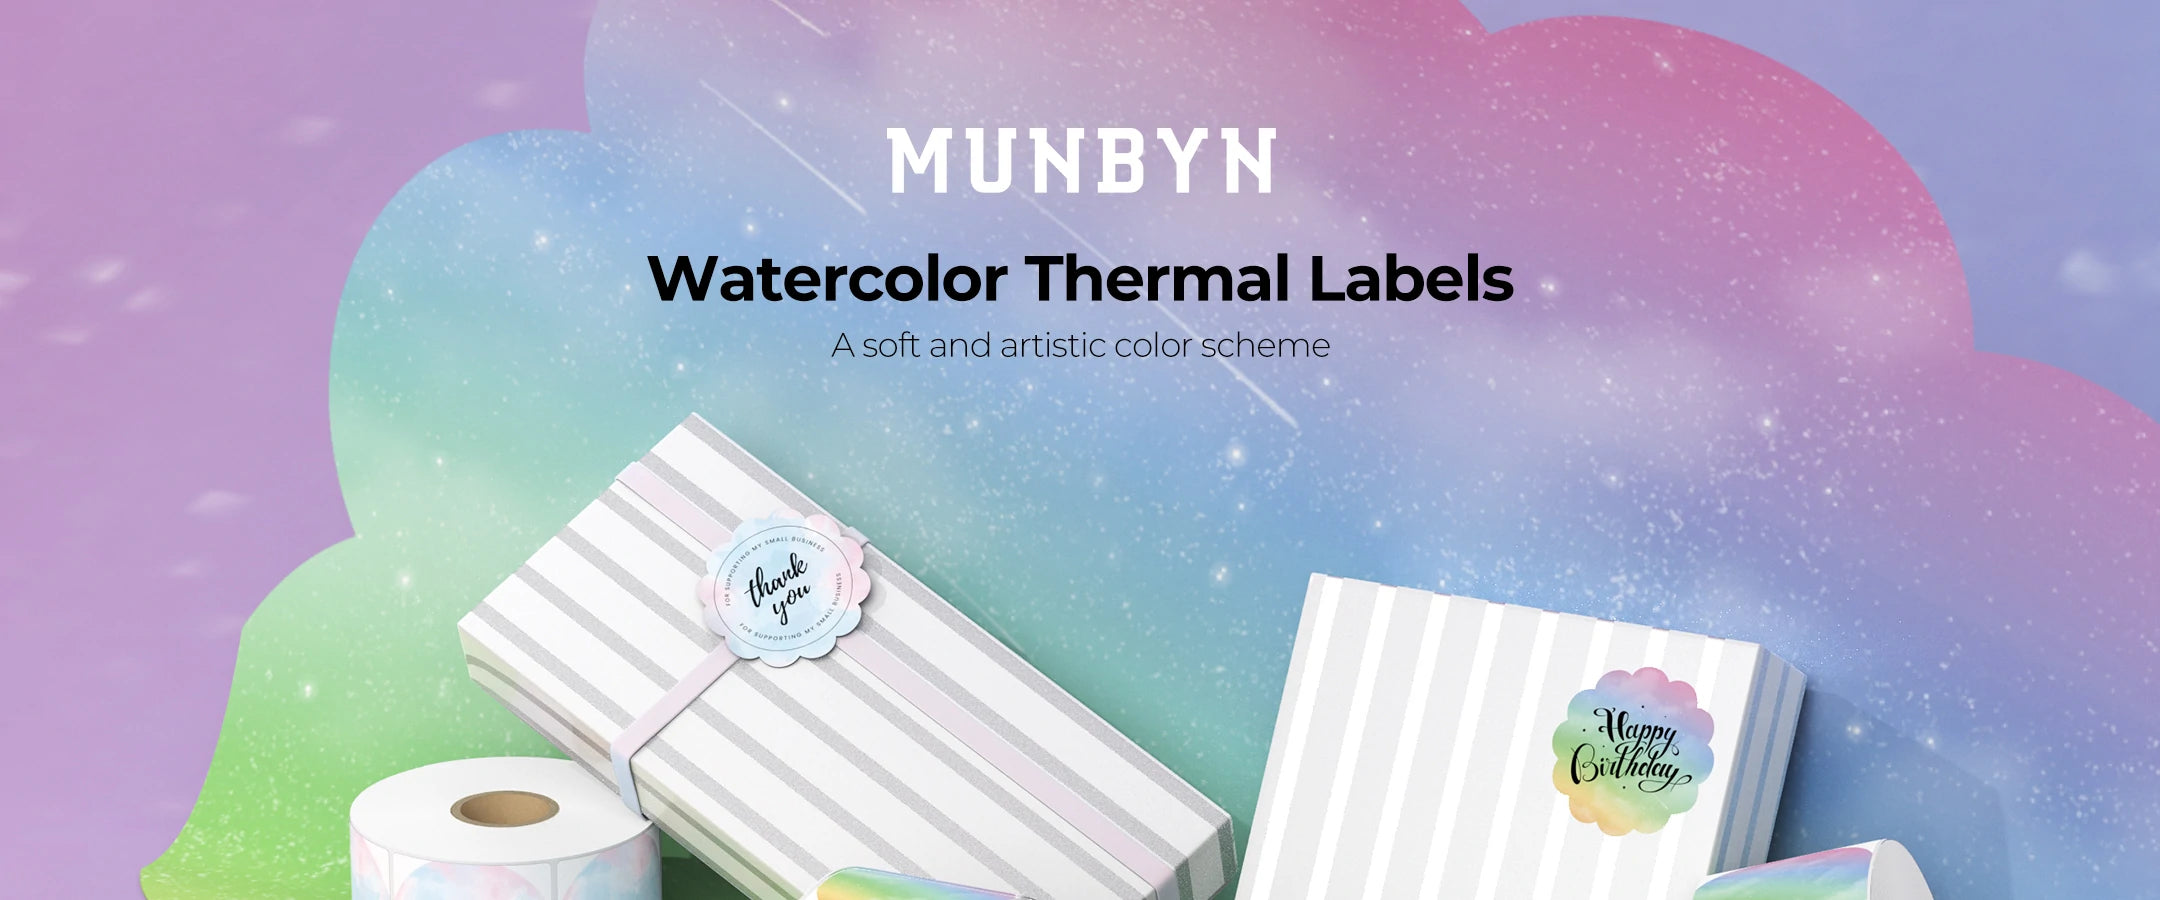 MUNBYN provides two kinds of watercolor square thermal labels.